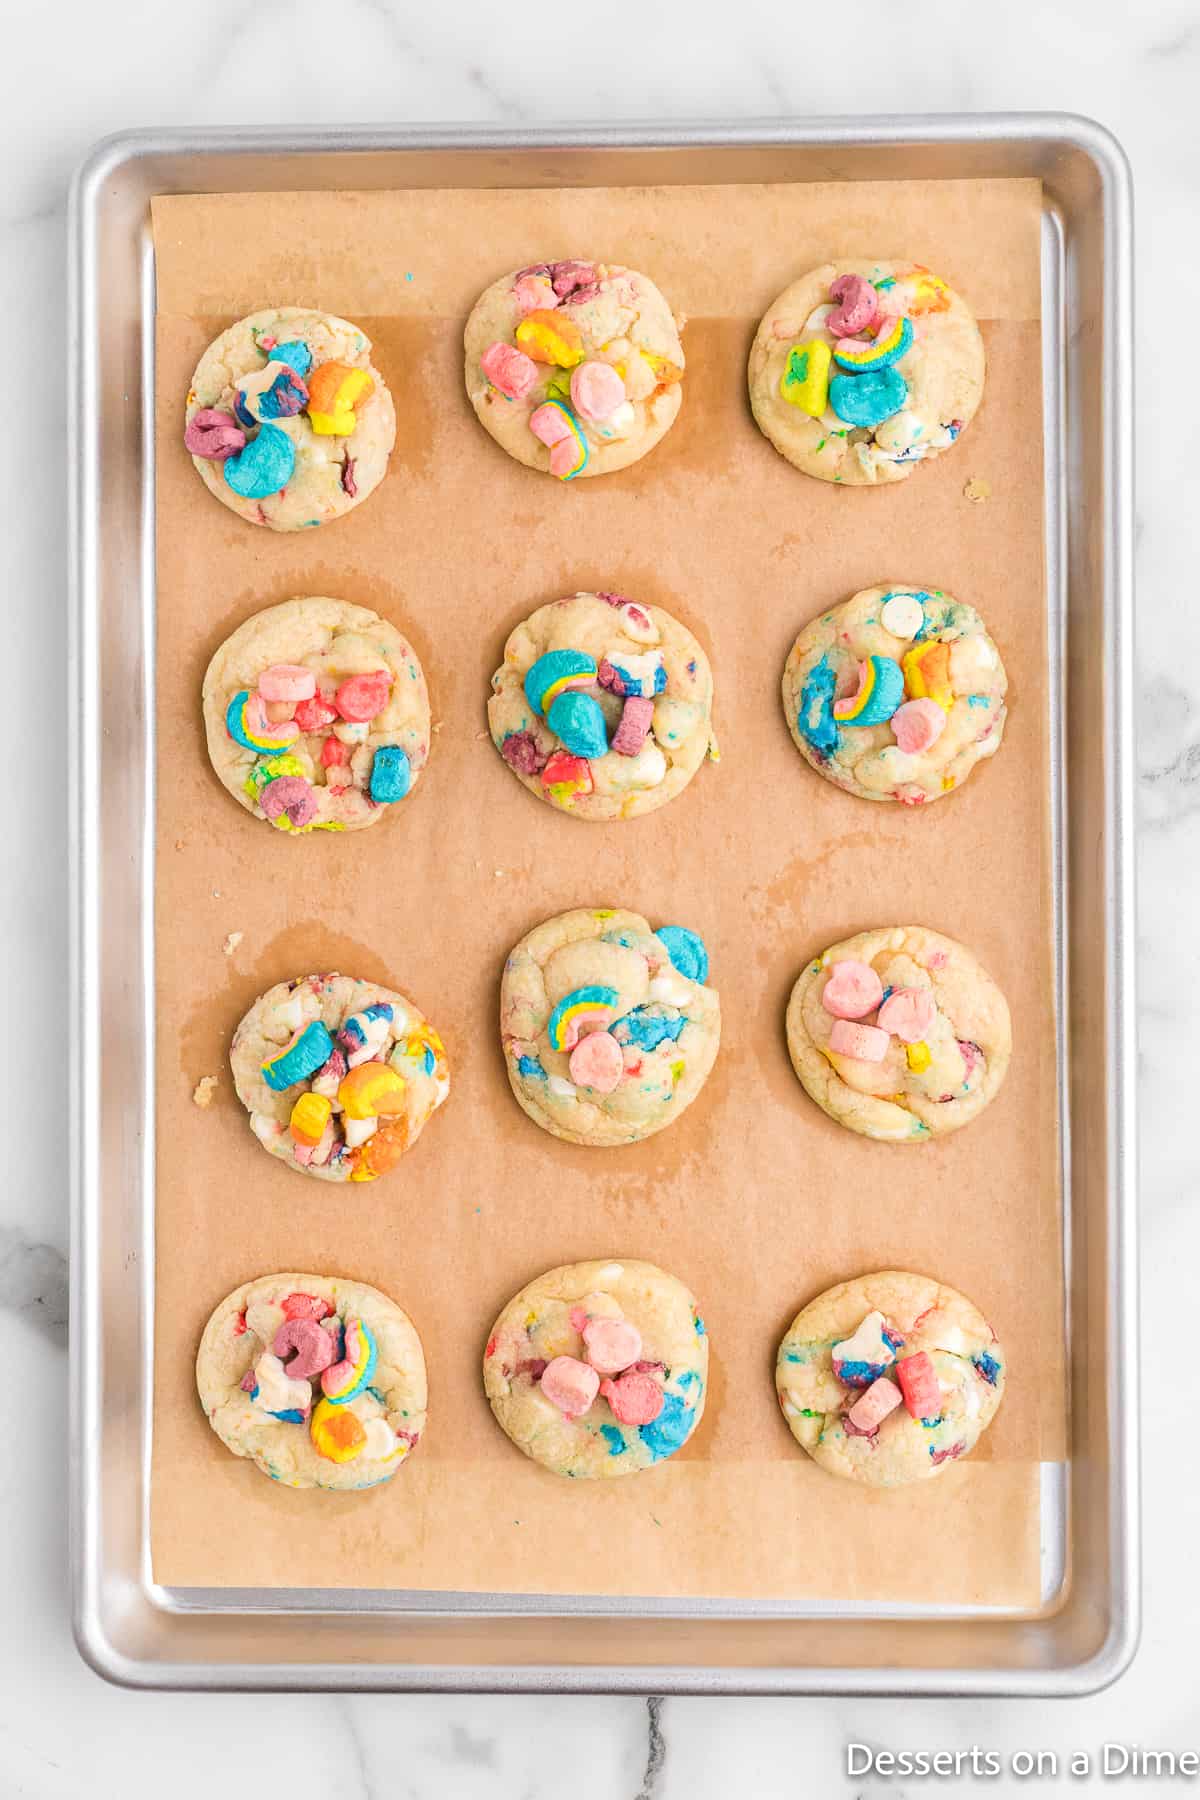 Baked Lucky Charm cookies on a baking sheet